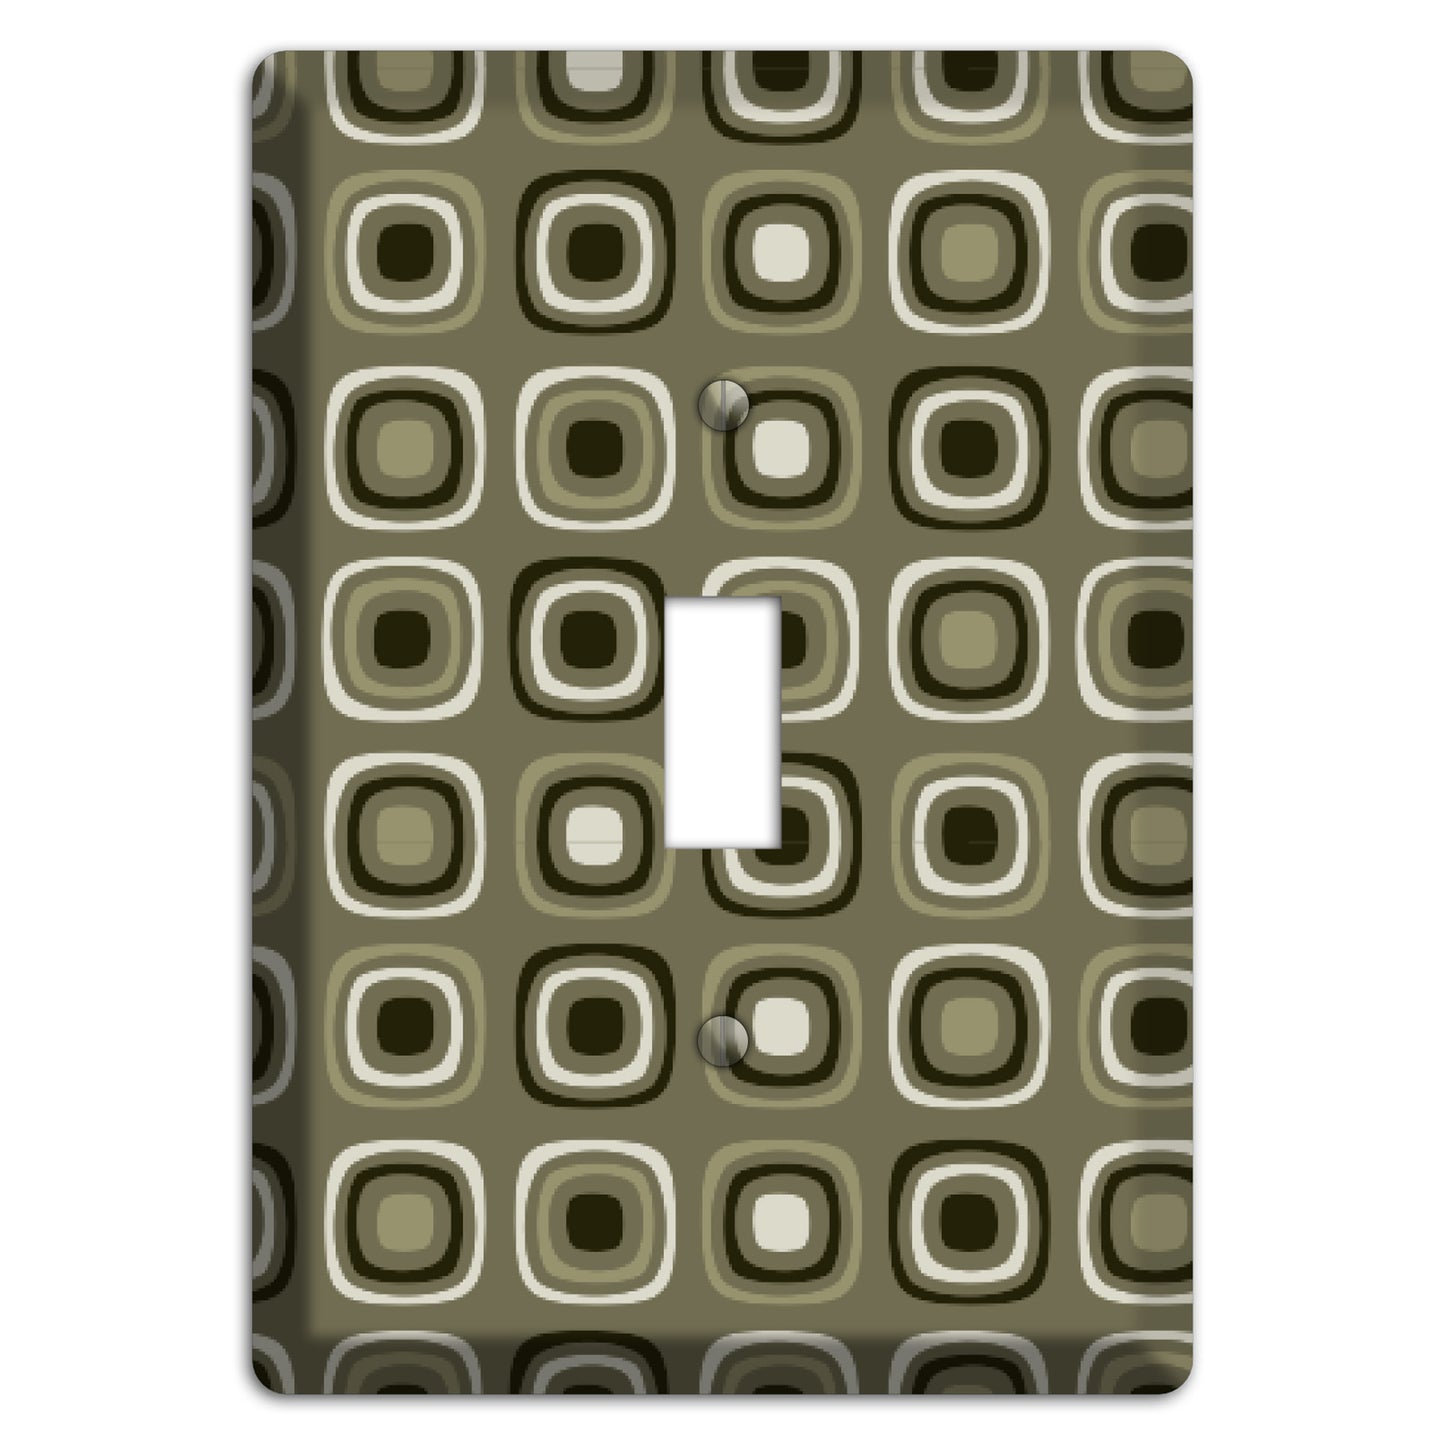 Multi Olive and Brown Retro Squares Cover Plates